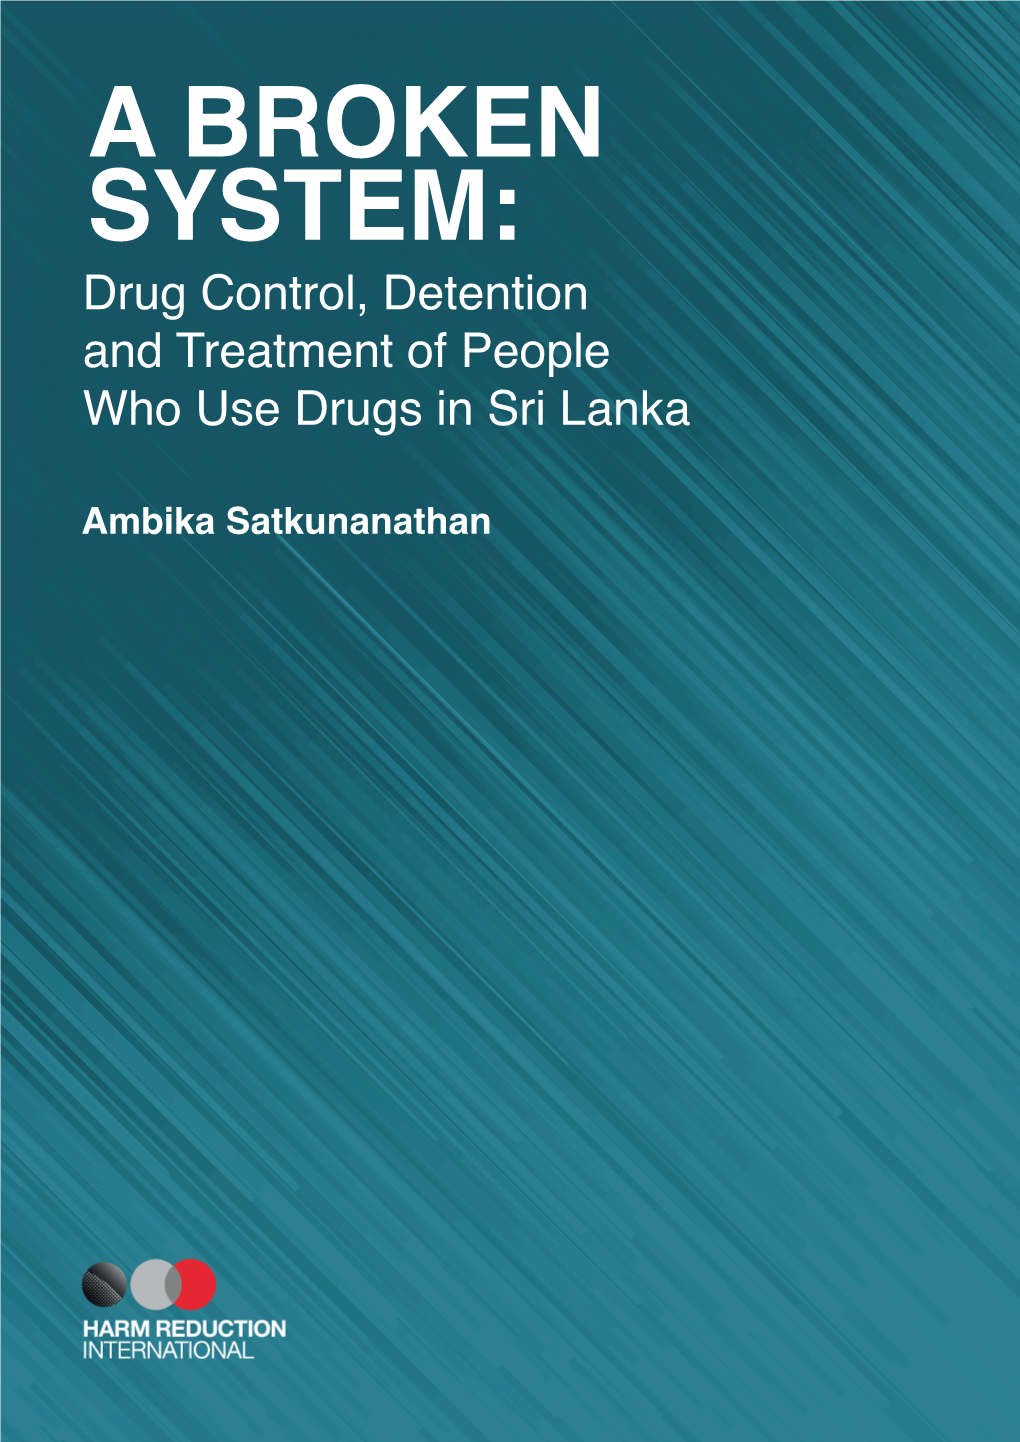 Drug Control in Sri Lanka and Whether It Adheres to International Human Rights Standards